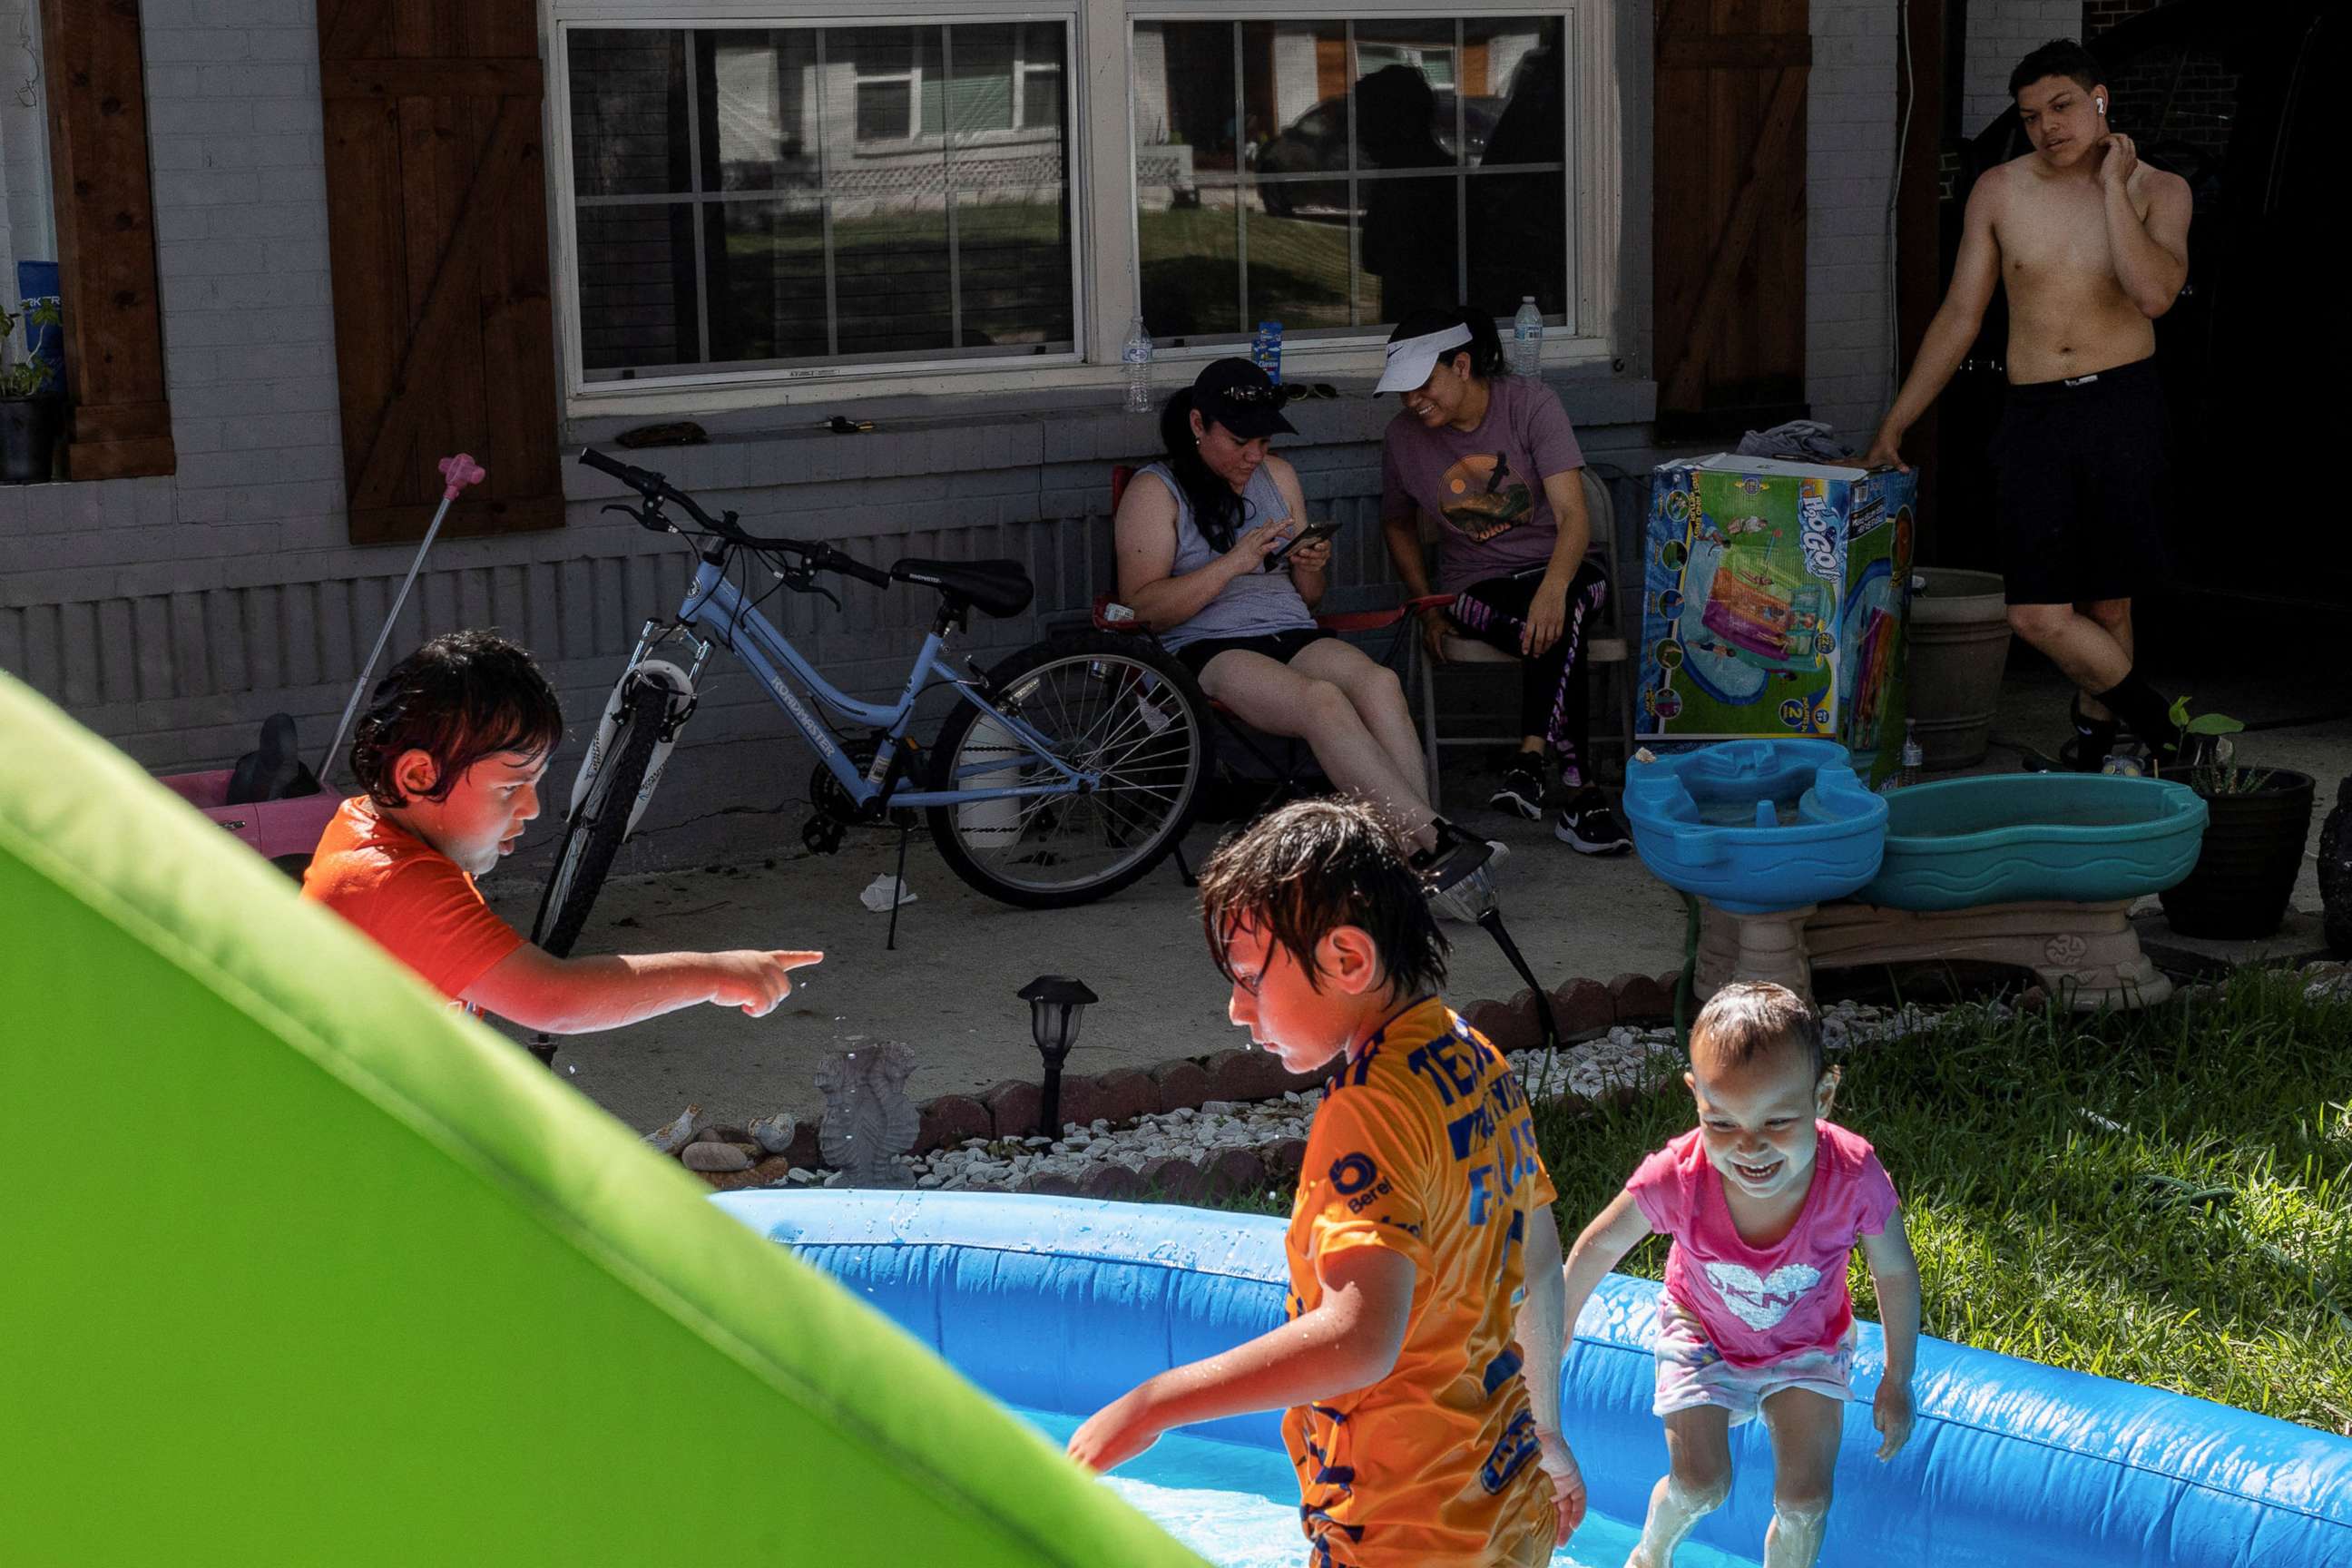 PHOTO: Neighbors Maria Hernandez, Luisa Ortega and Issac Montelongo sit outside as they watch the kids play in water during a heatwave with expected temperatures of 102 F in Dallas, June 12, 2022. 